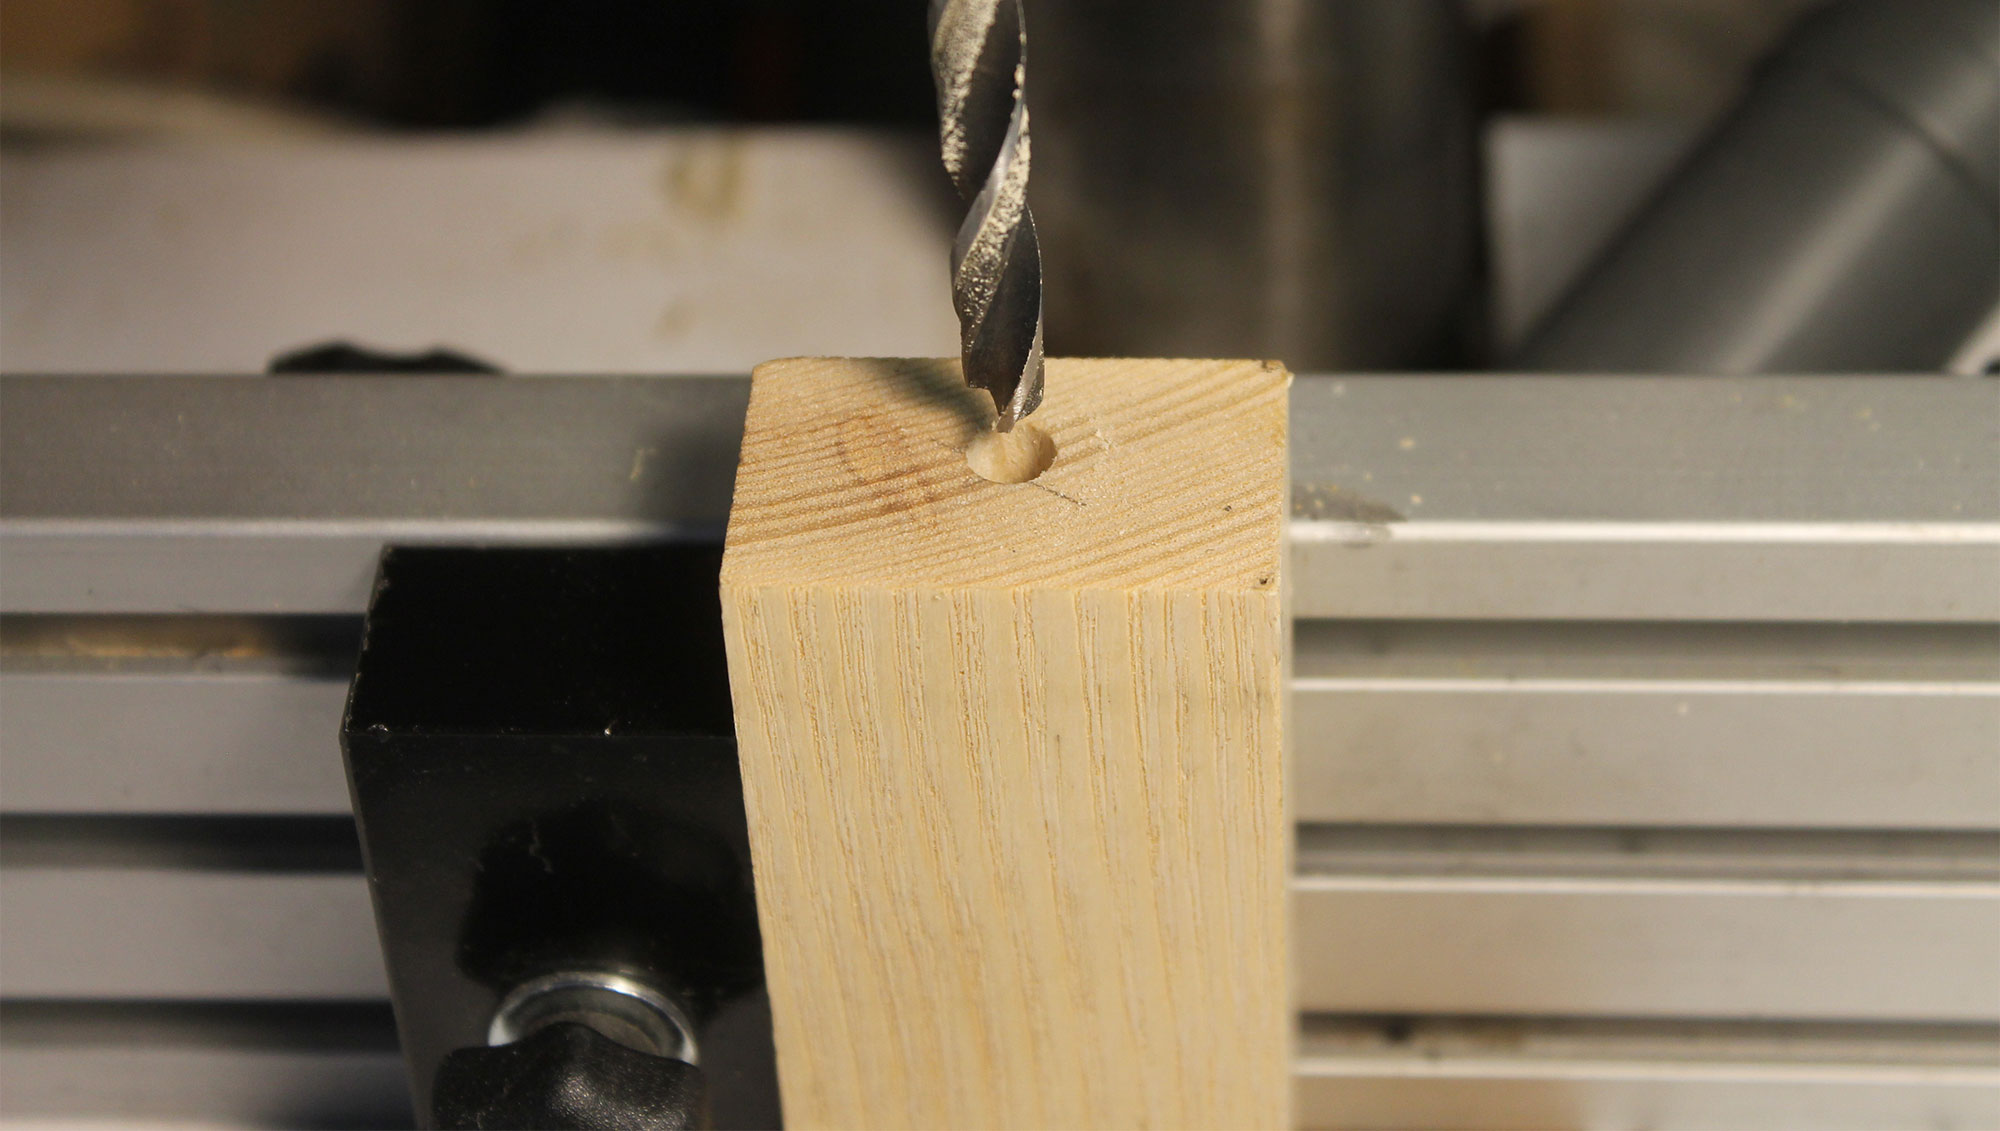 The off-center clamping block.